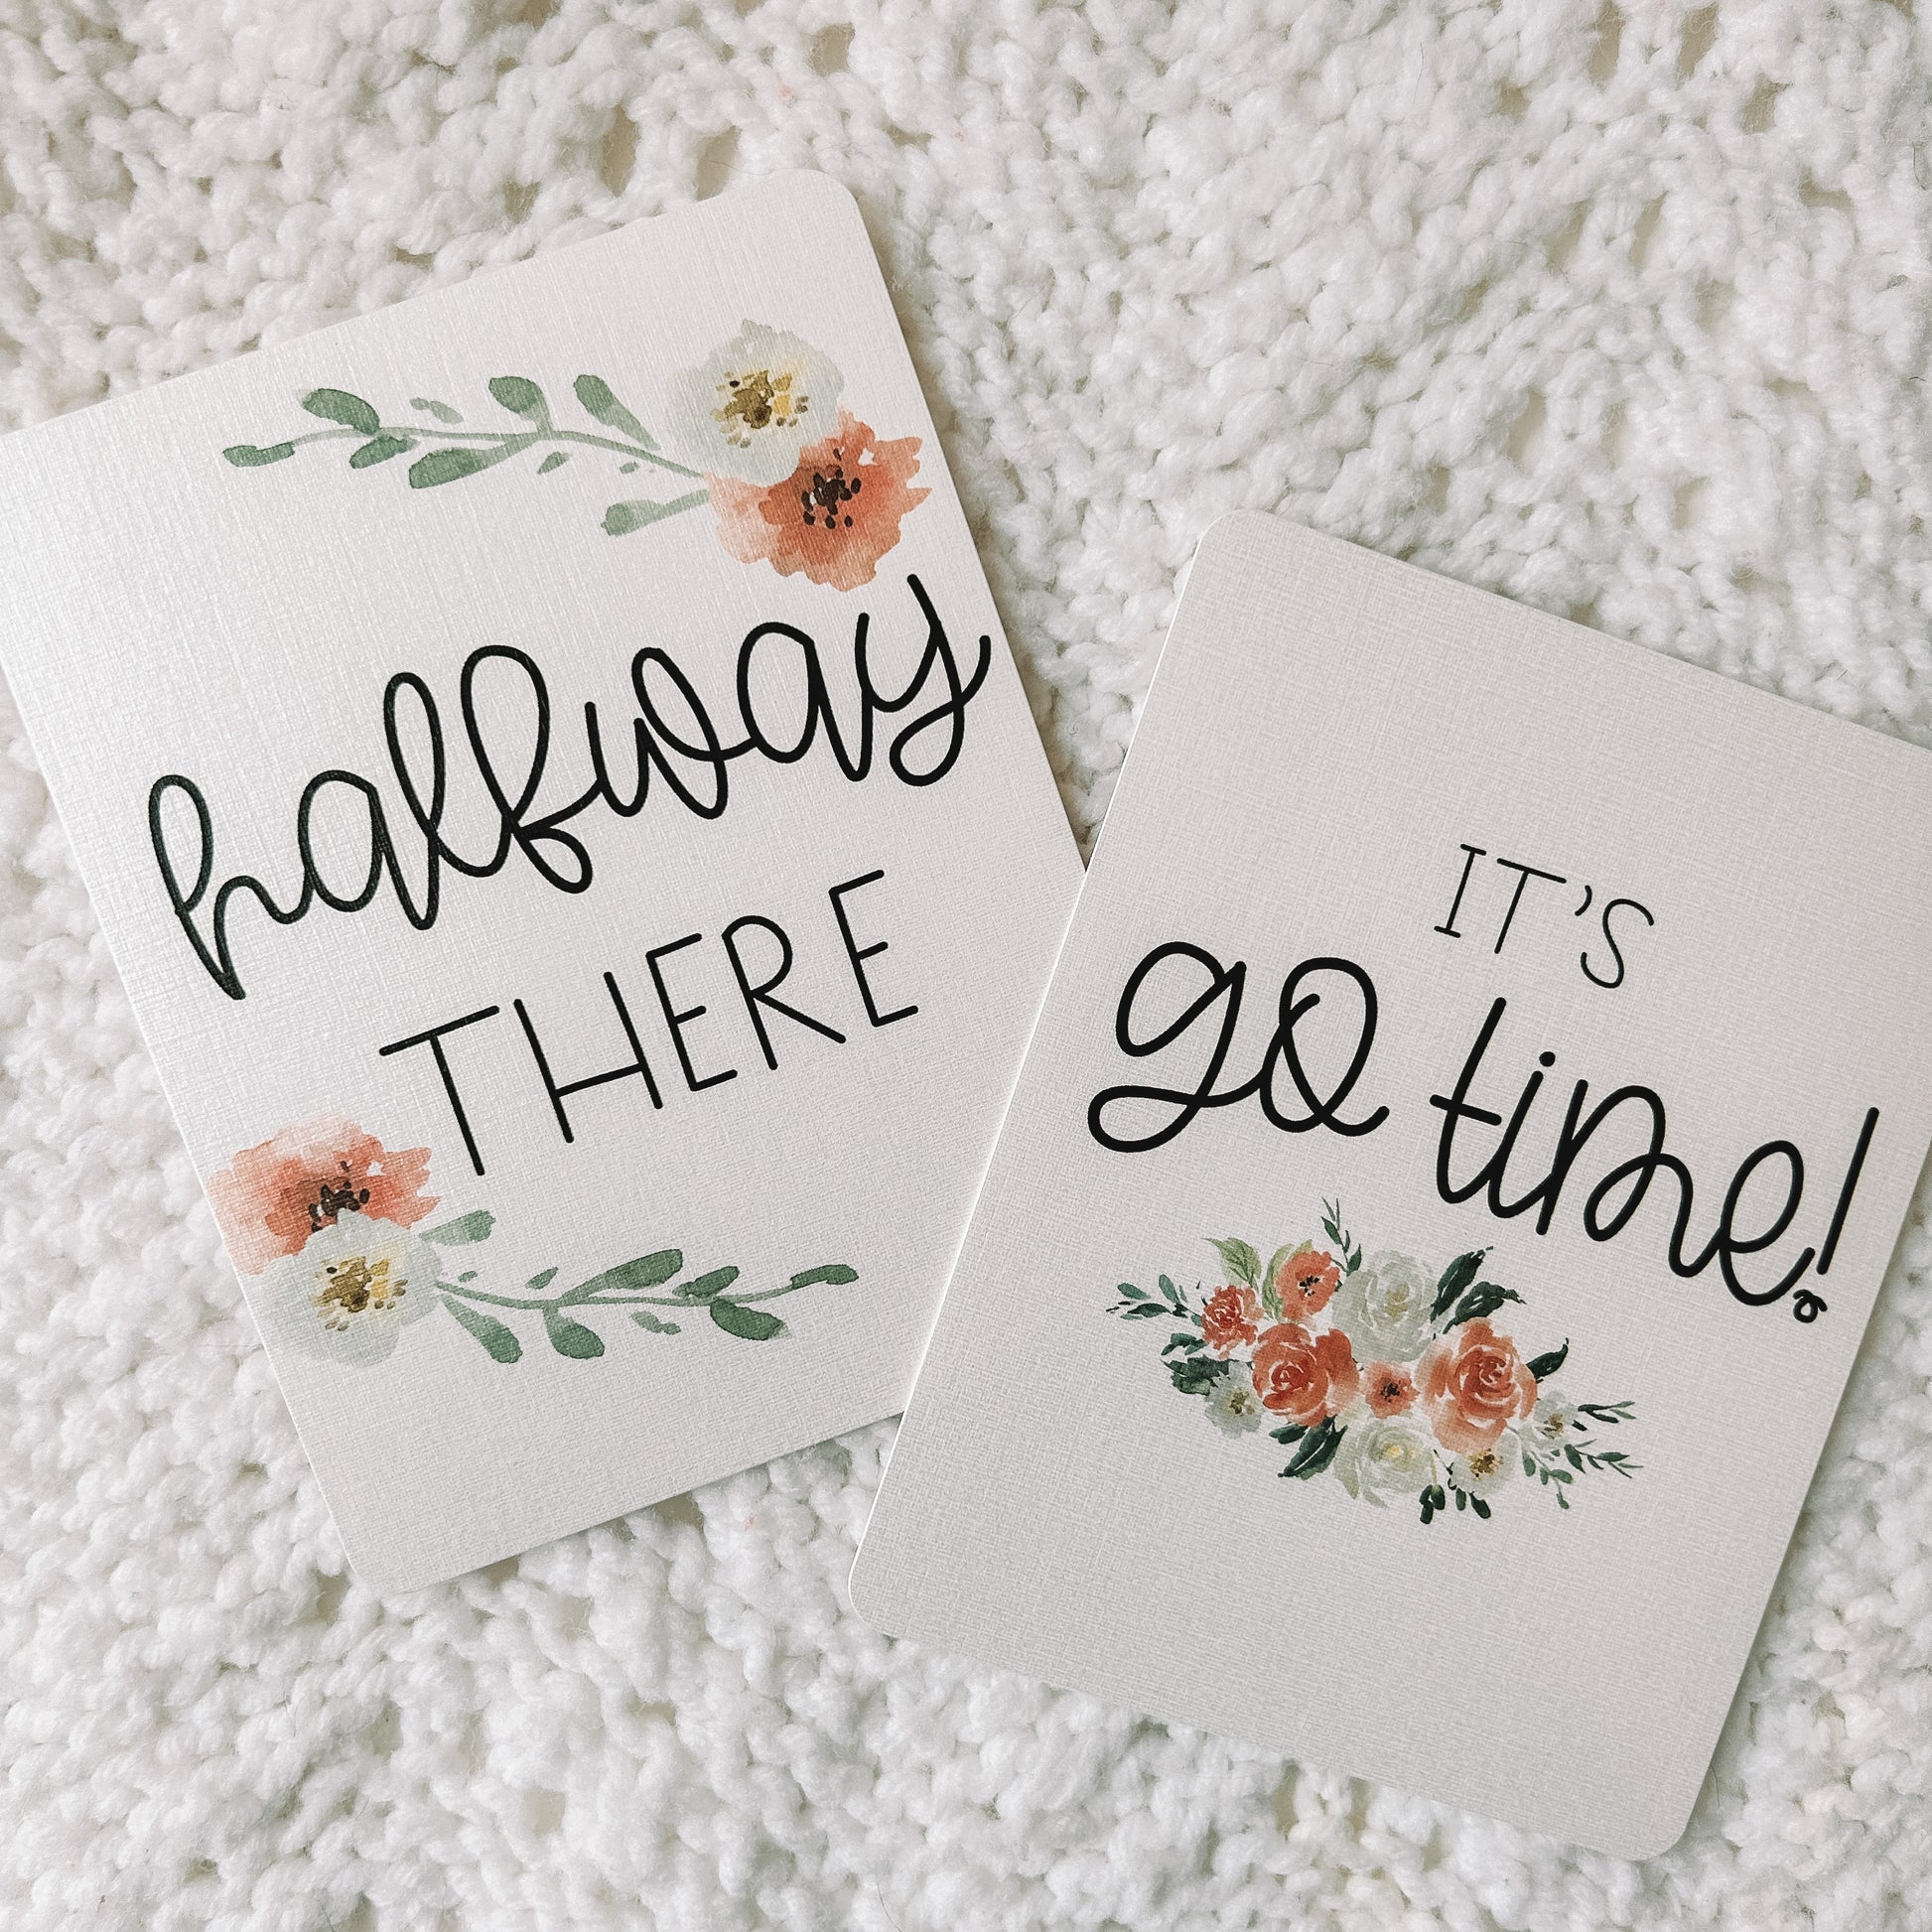 Two milestone cards. One reads halfway there with flowers around it and the other reads it's go time with a floral bouquet beneath it.